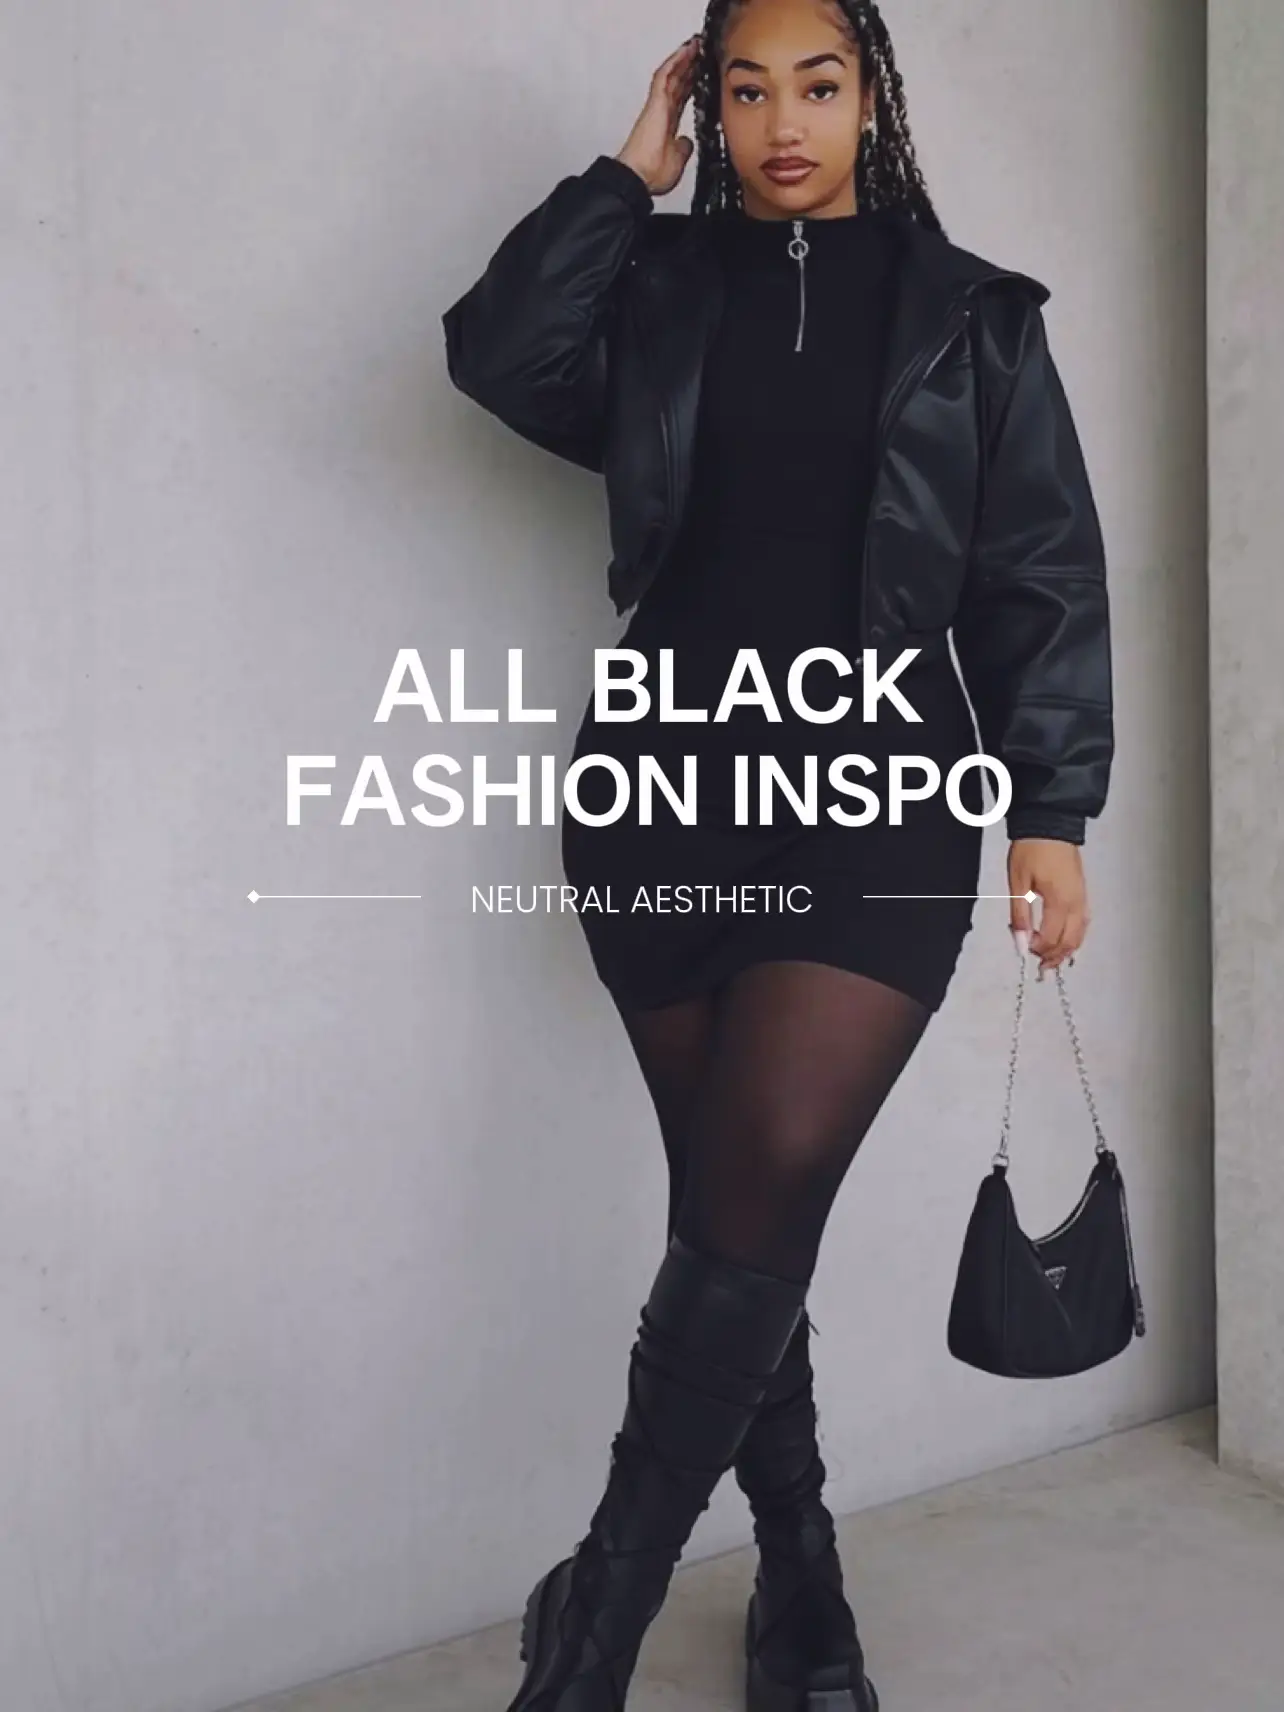 a simple black #ootd in always got me feeling a type feat. my fave